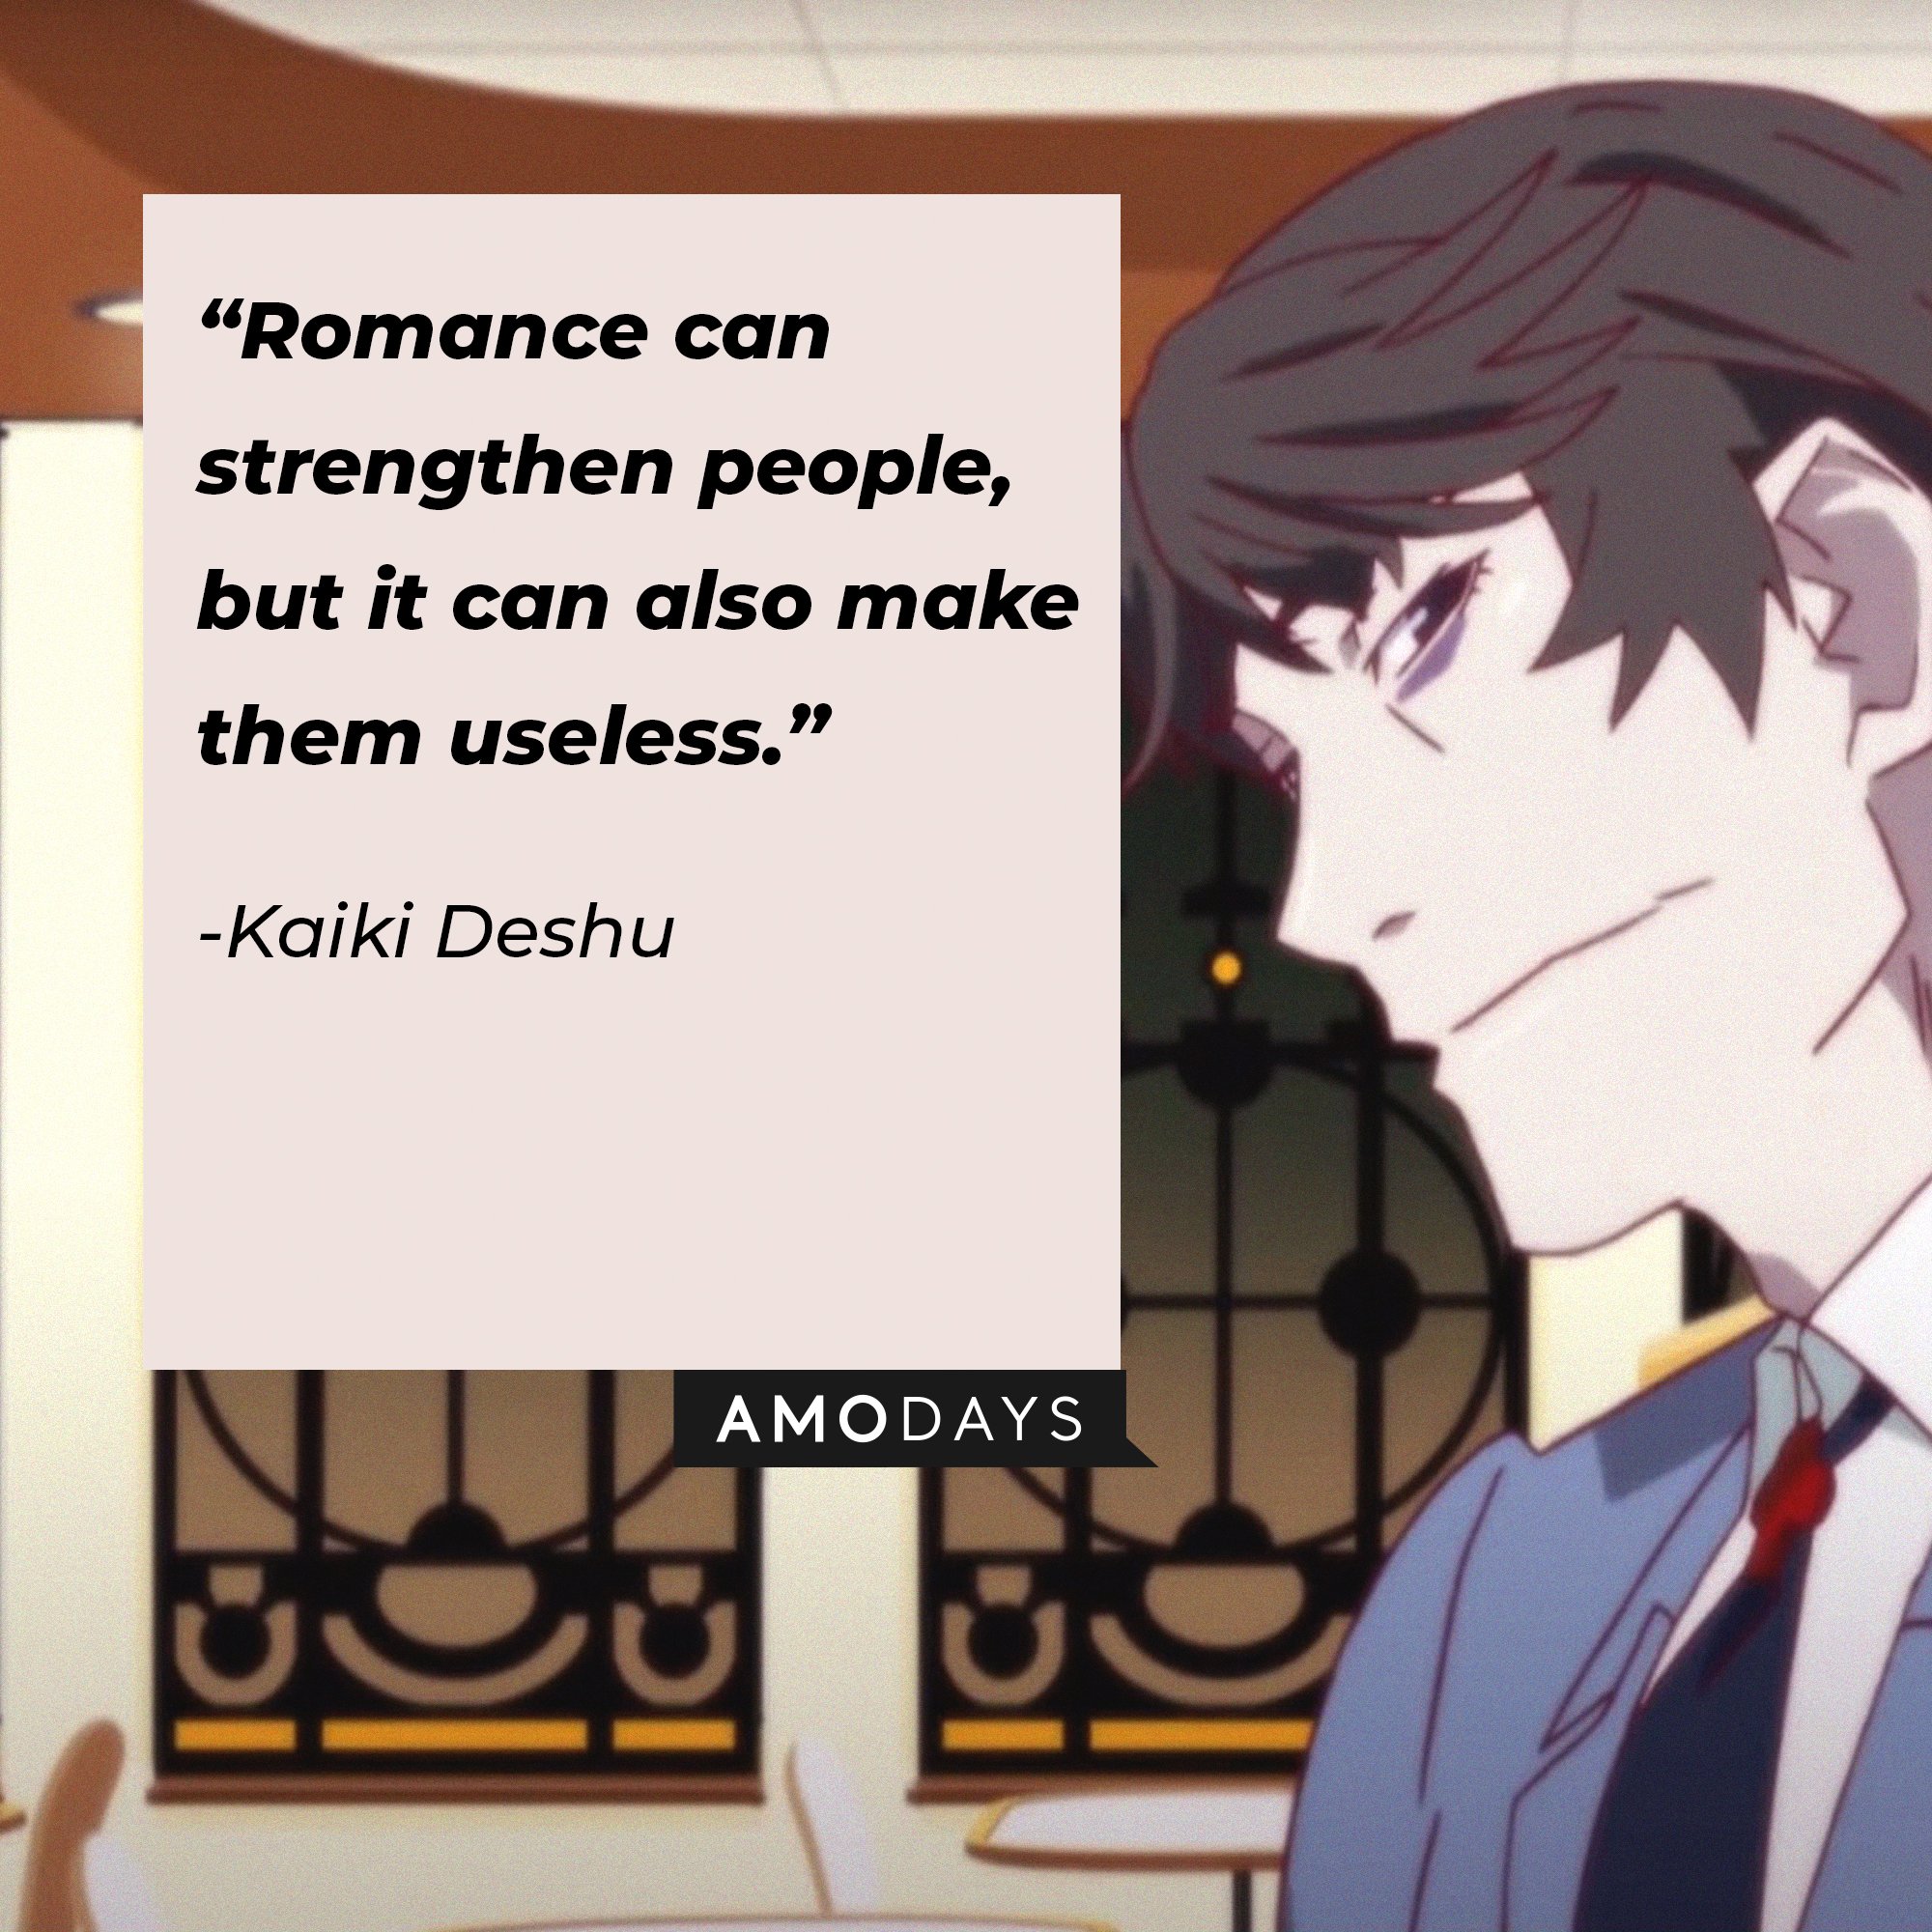 Kaiki Deshu's quote: "Romance can strengthen people, but it can also make them useless." | Image: AmoDays 